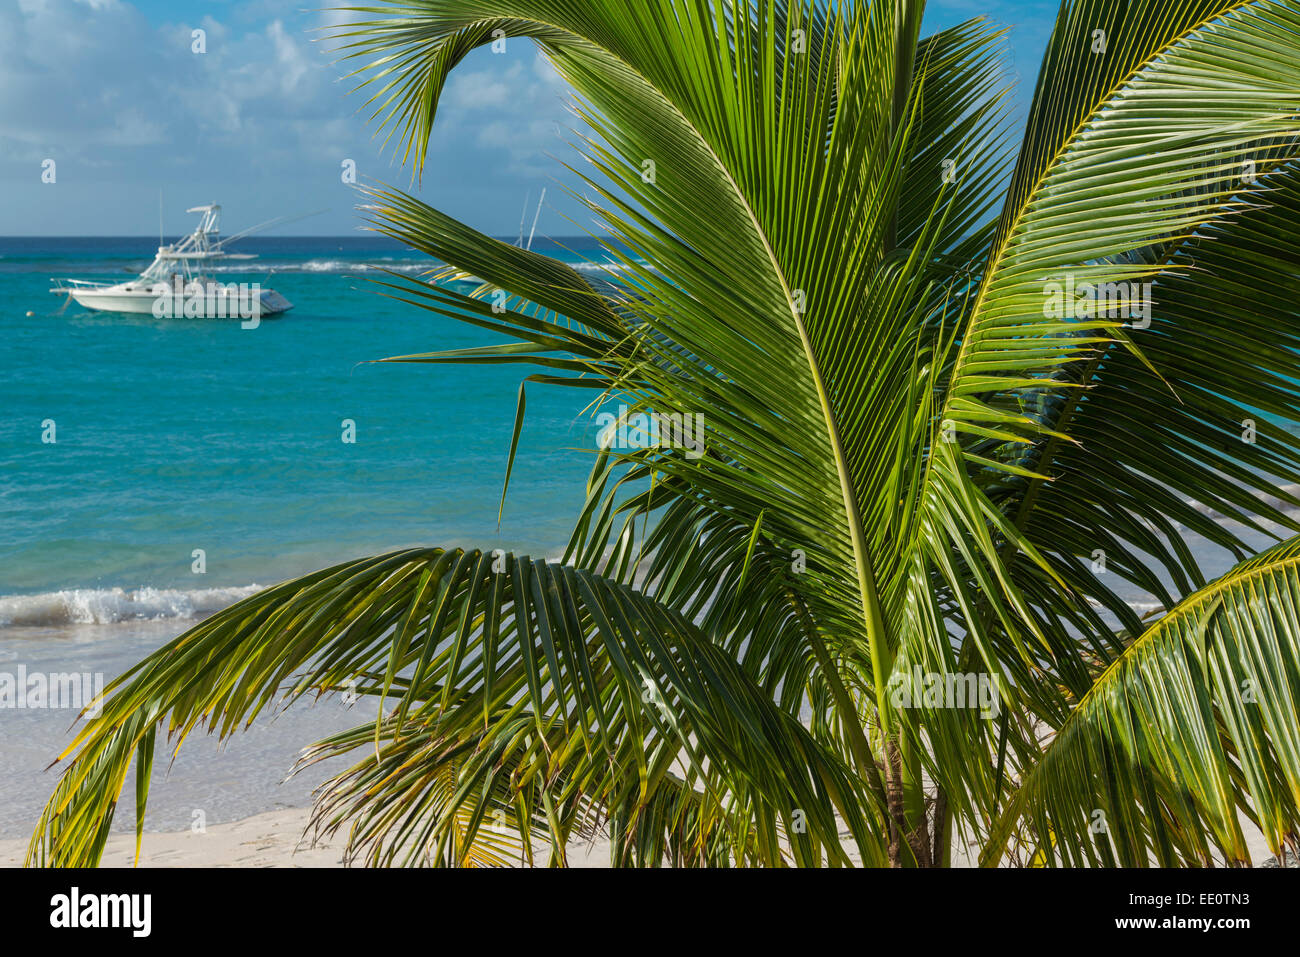 Worthing Beach on the south coast of Barbados, West Indies - EDITORIAL USE ONLY Stock Photo